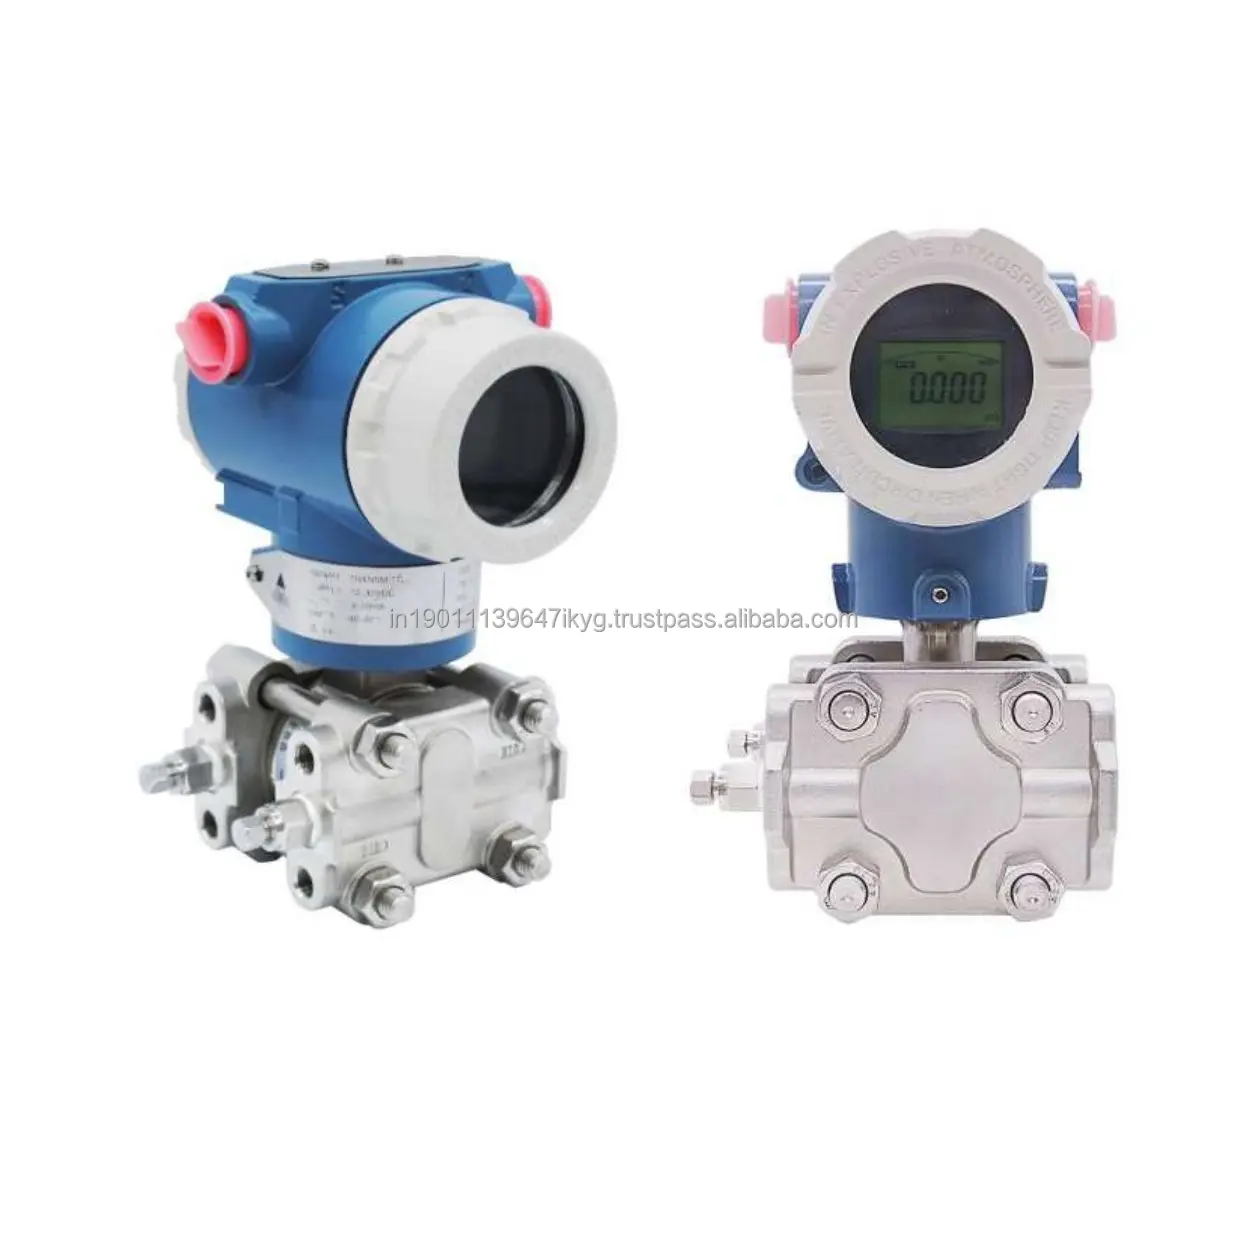 Explosion Proof and Weather Proof Housing Differential Pressure Transmitter Flow Measurement Across Venturi Tubes Orifice Plates